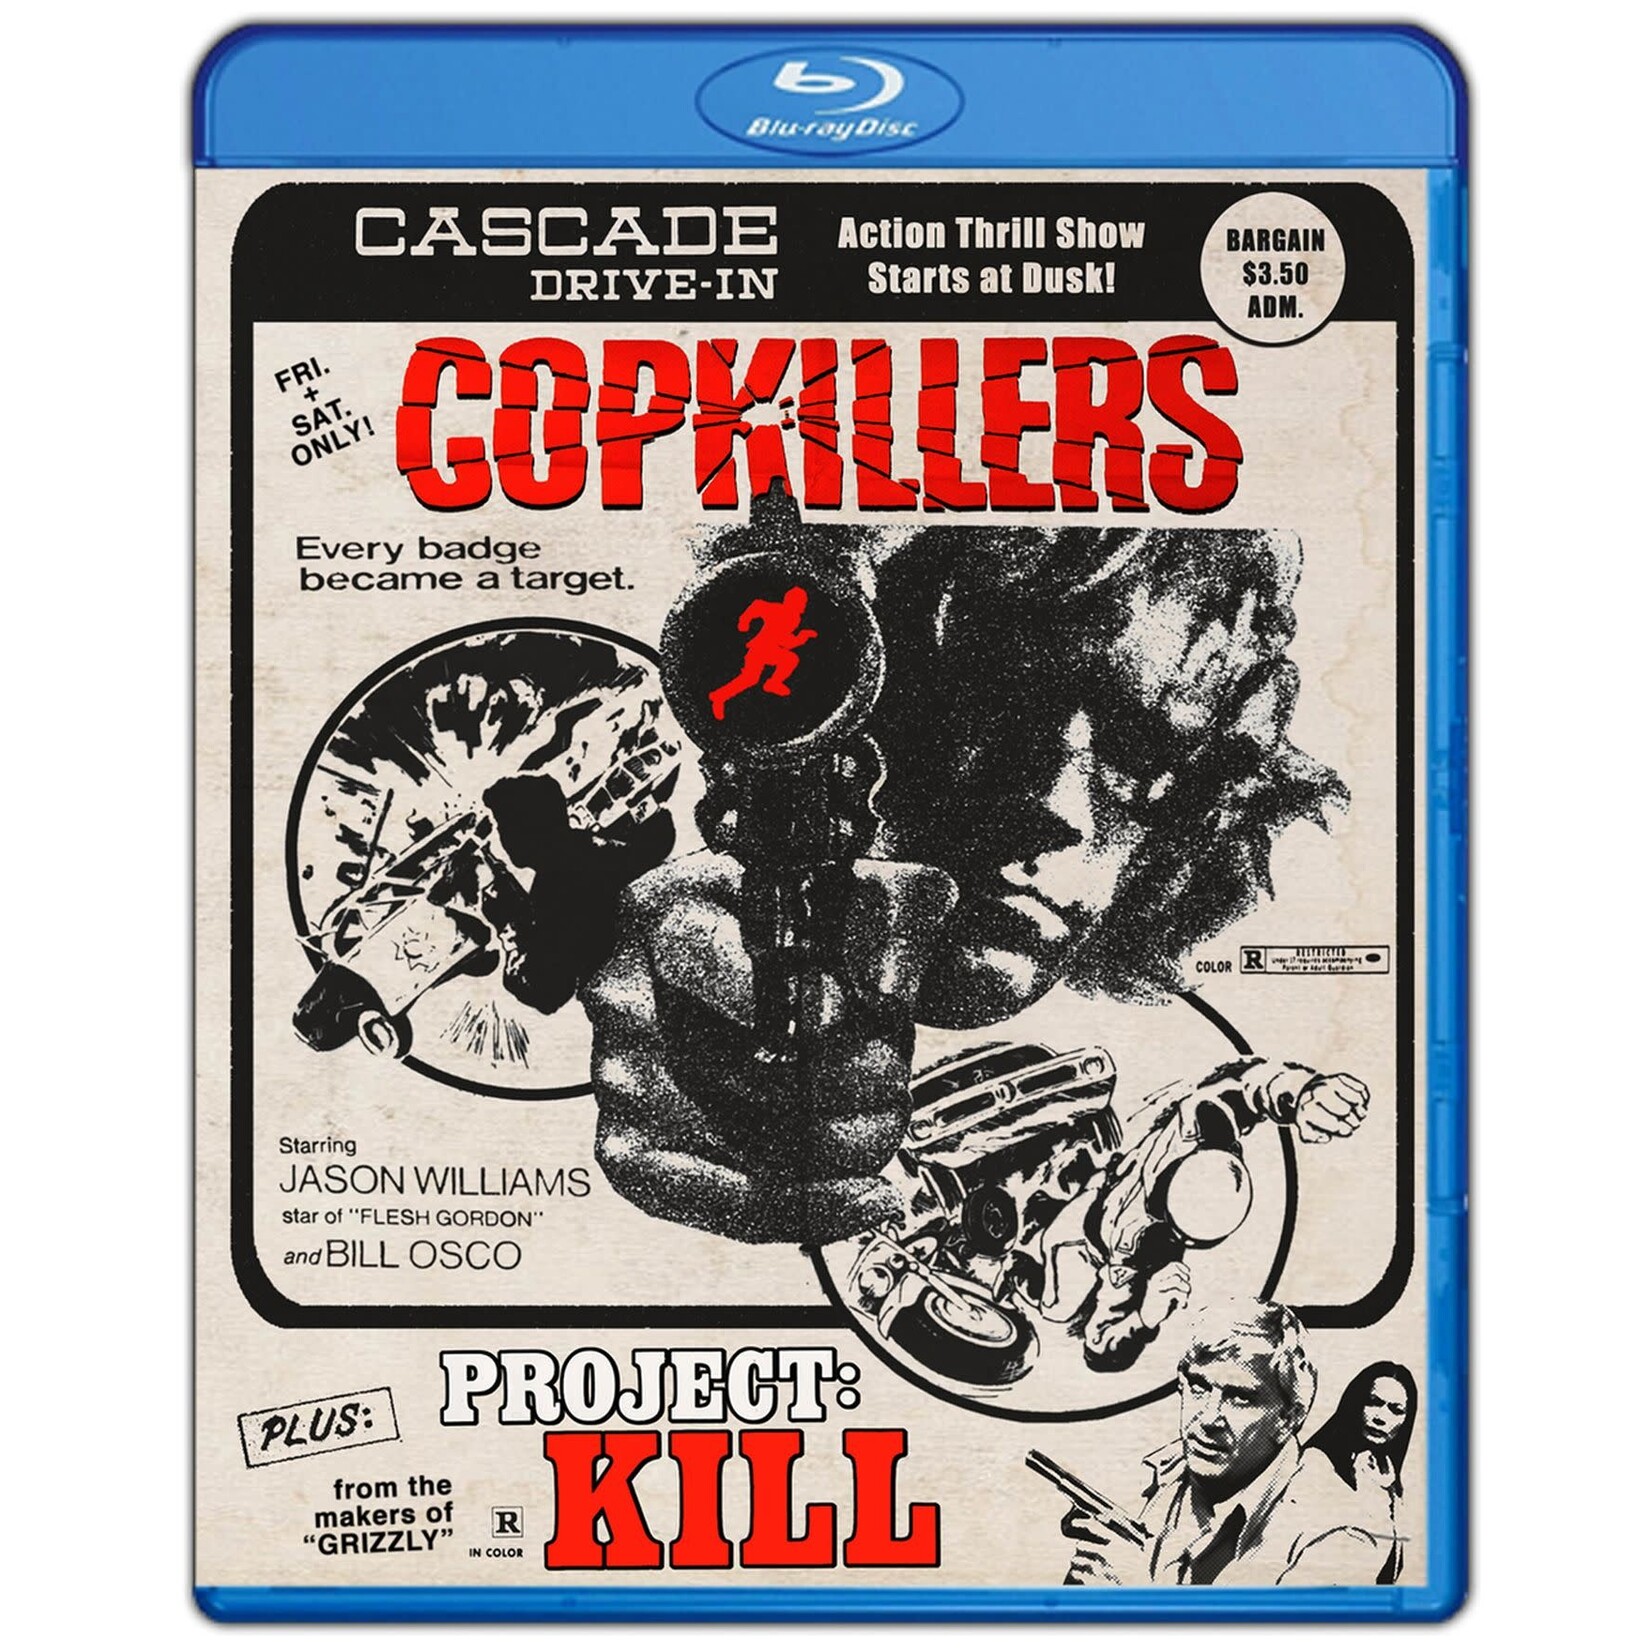 Cop Killers/Project: Kill - Drive-In Double Feature [BRD]